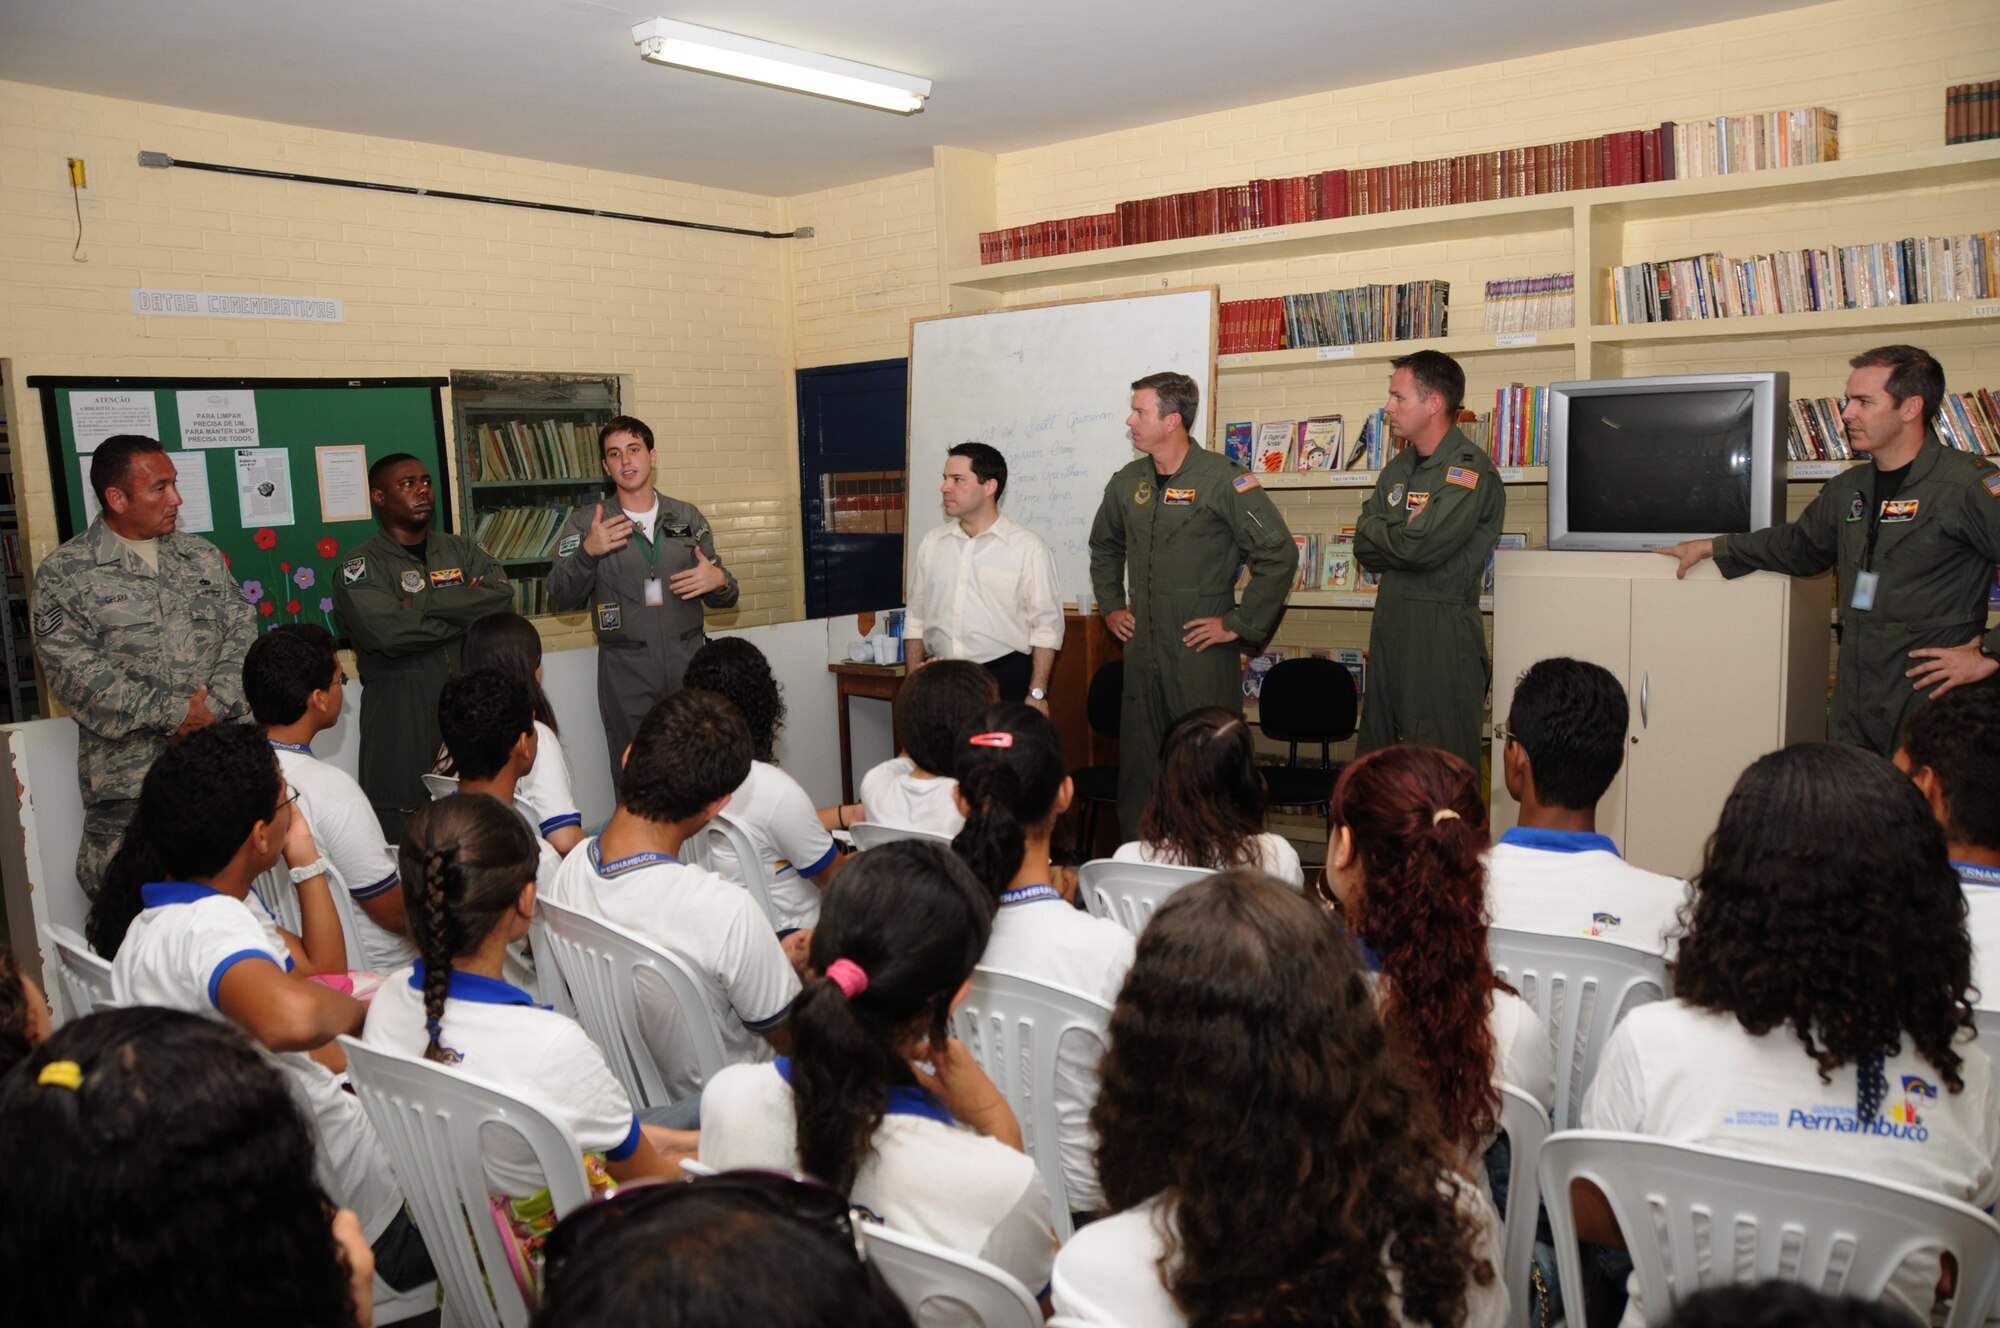 LT Spiller of the Brazilian Air Force and members of the 161st Air Refueling Wing, Phoenix, Ariz., talk with students from Escola Santos Dumont School on November 11, 2010, in Recife, Brazil . The 161st ARW is participating in CRUZEX V, or Cruzeiro Do Sul (Southern Cross).  CRUZEX  is a multi-national combined exercise involving the Air Forces of Argentina, Brazil, Chile, France and Uruguay, and observers from numerous other countries with more than 82 aircraft and almost 3,000 Airmen involved.  U.S. Air Force Photo by Master Sgt. Kelly M. Deitloff